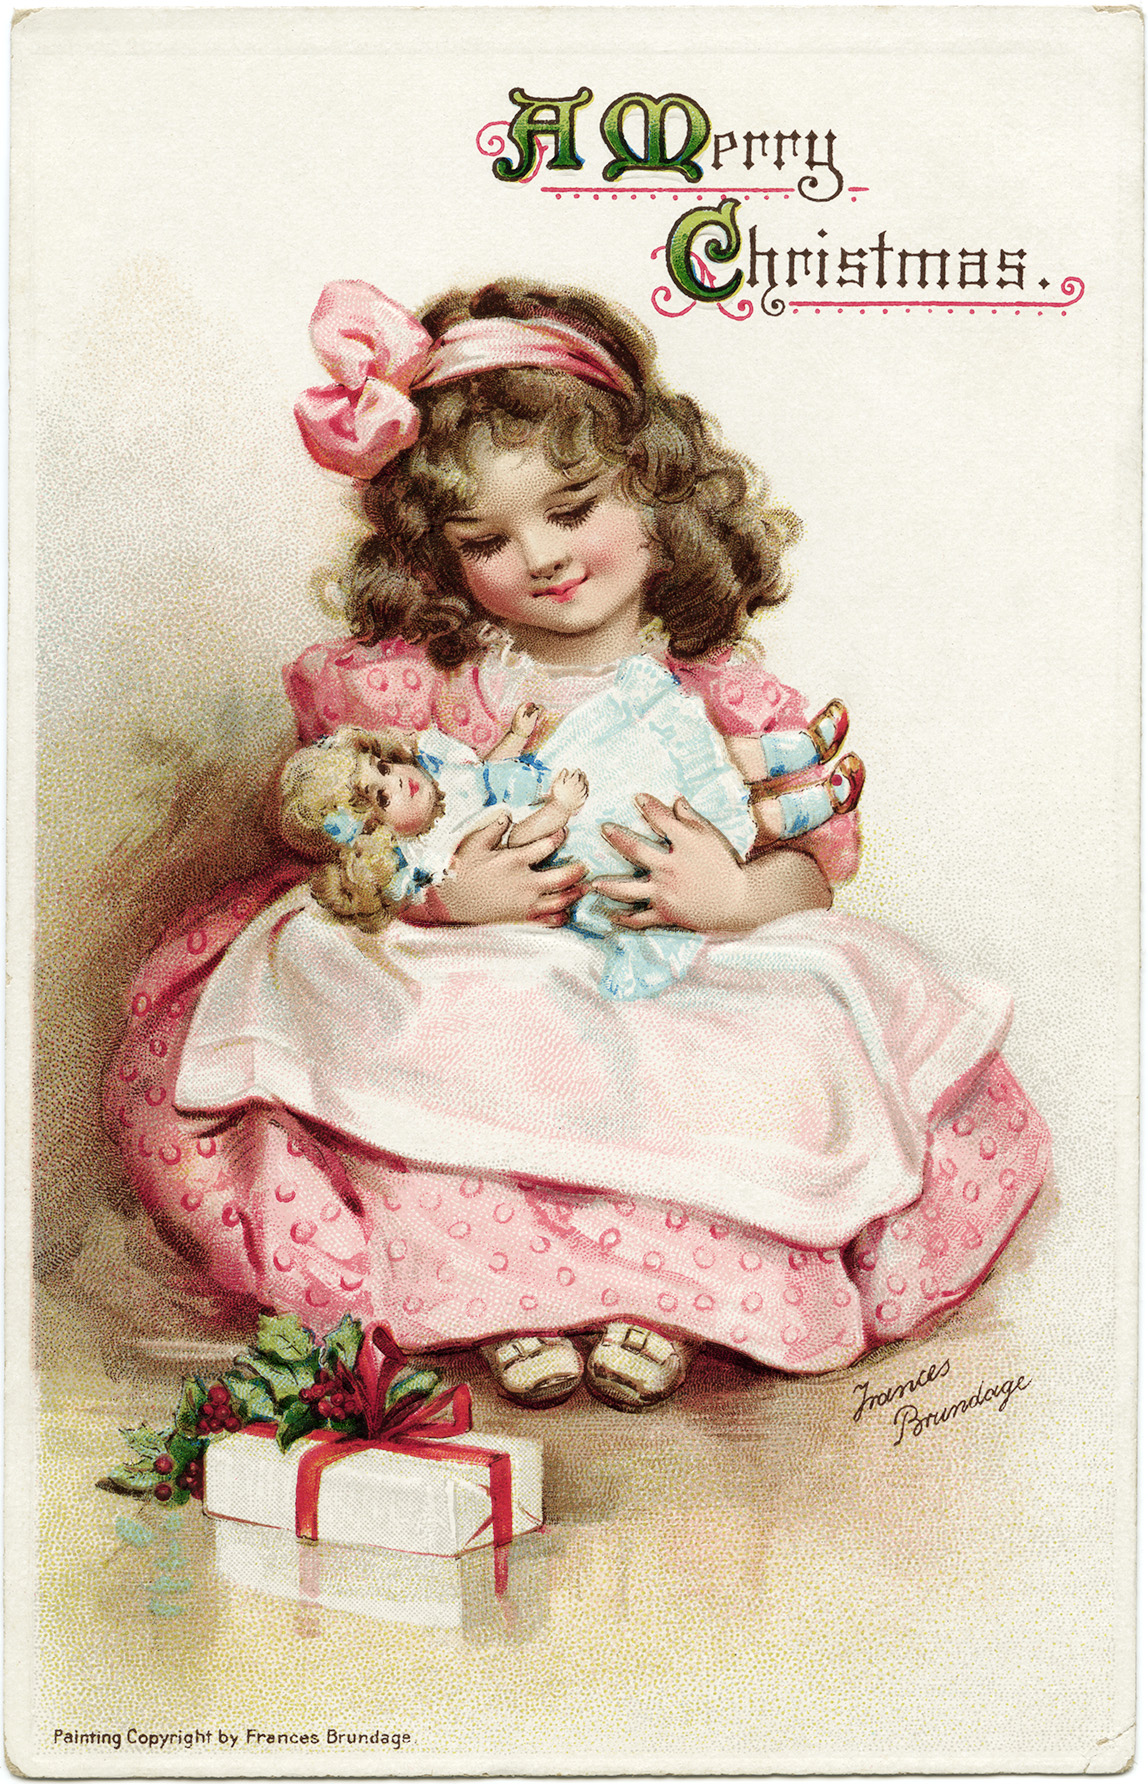 And Doll Clipart Girl Holding Dolly Image Vintage People Clip Art